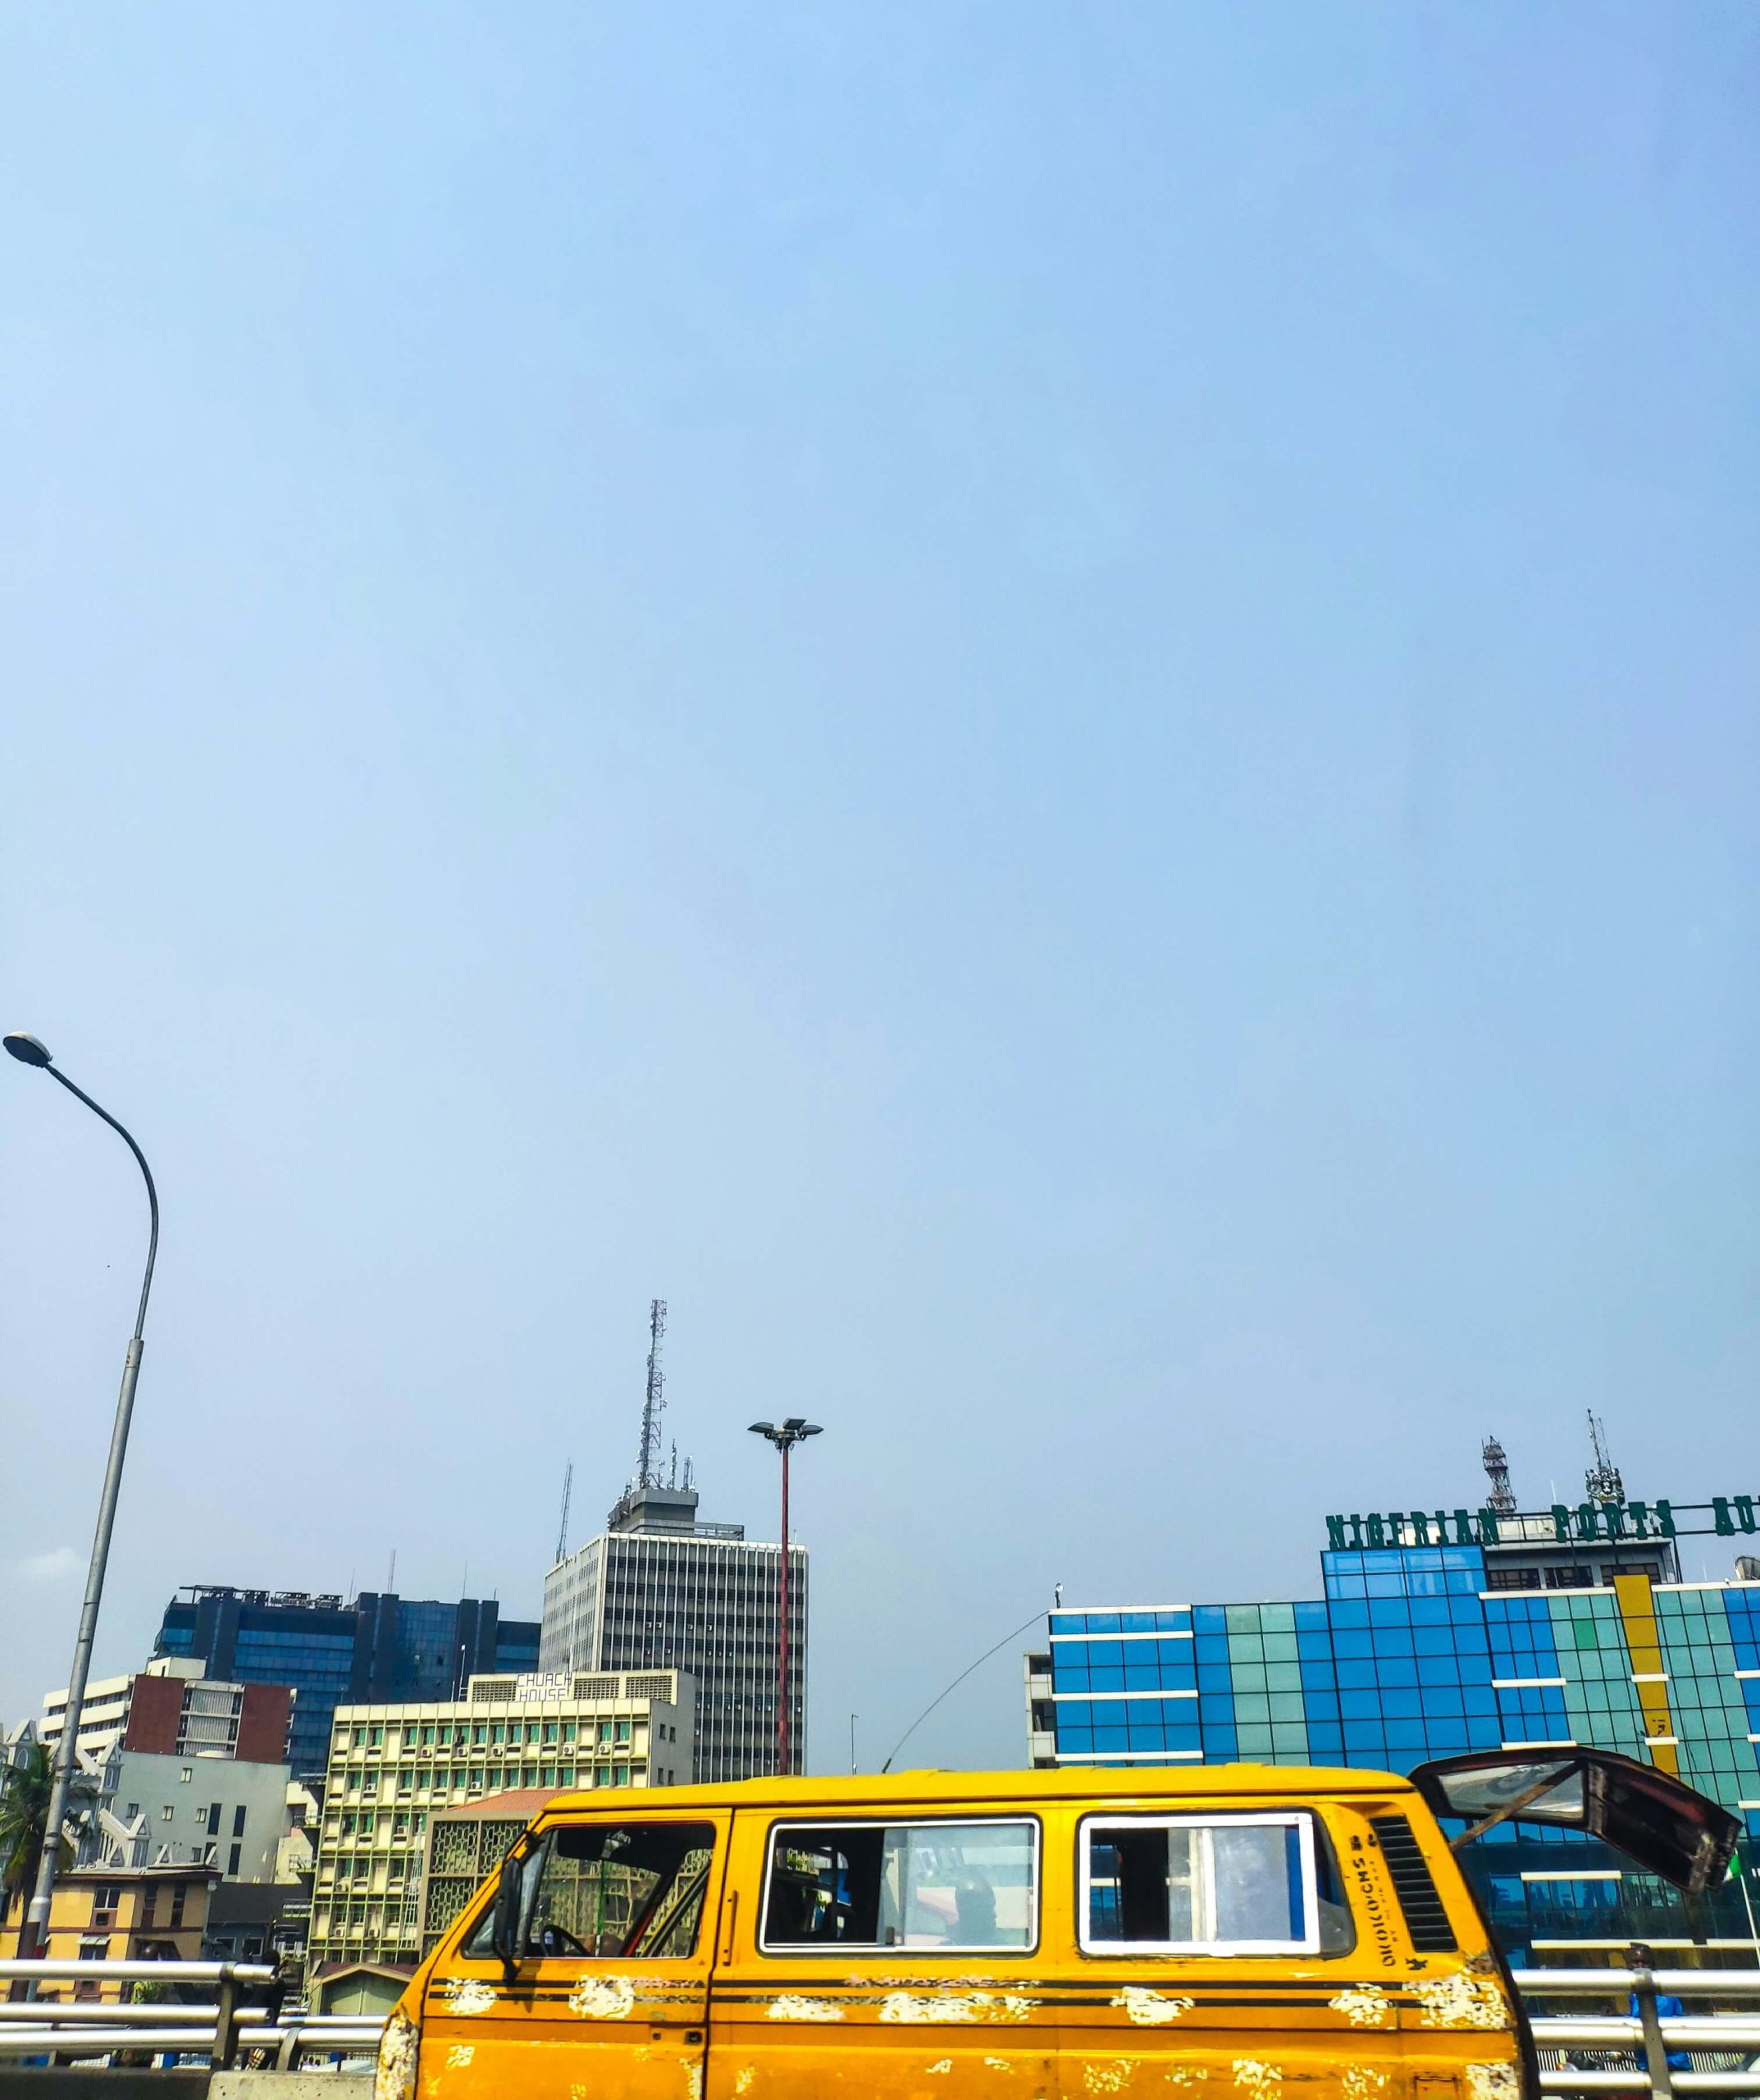 Lagos: Growing Really Fast